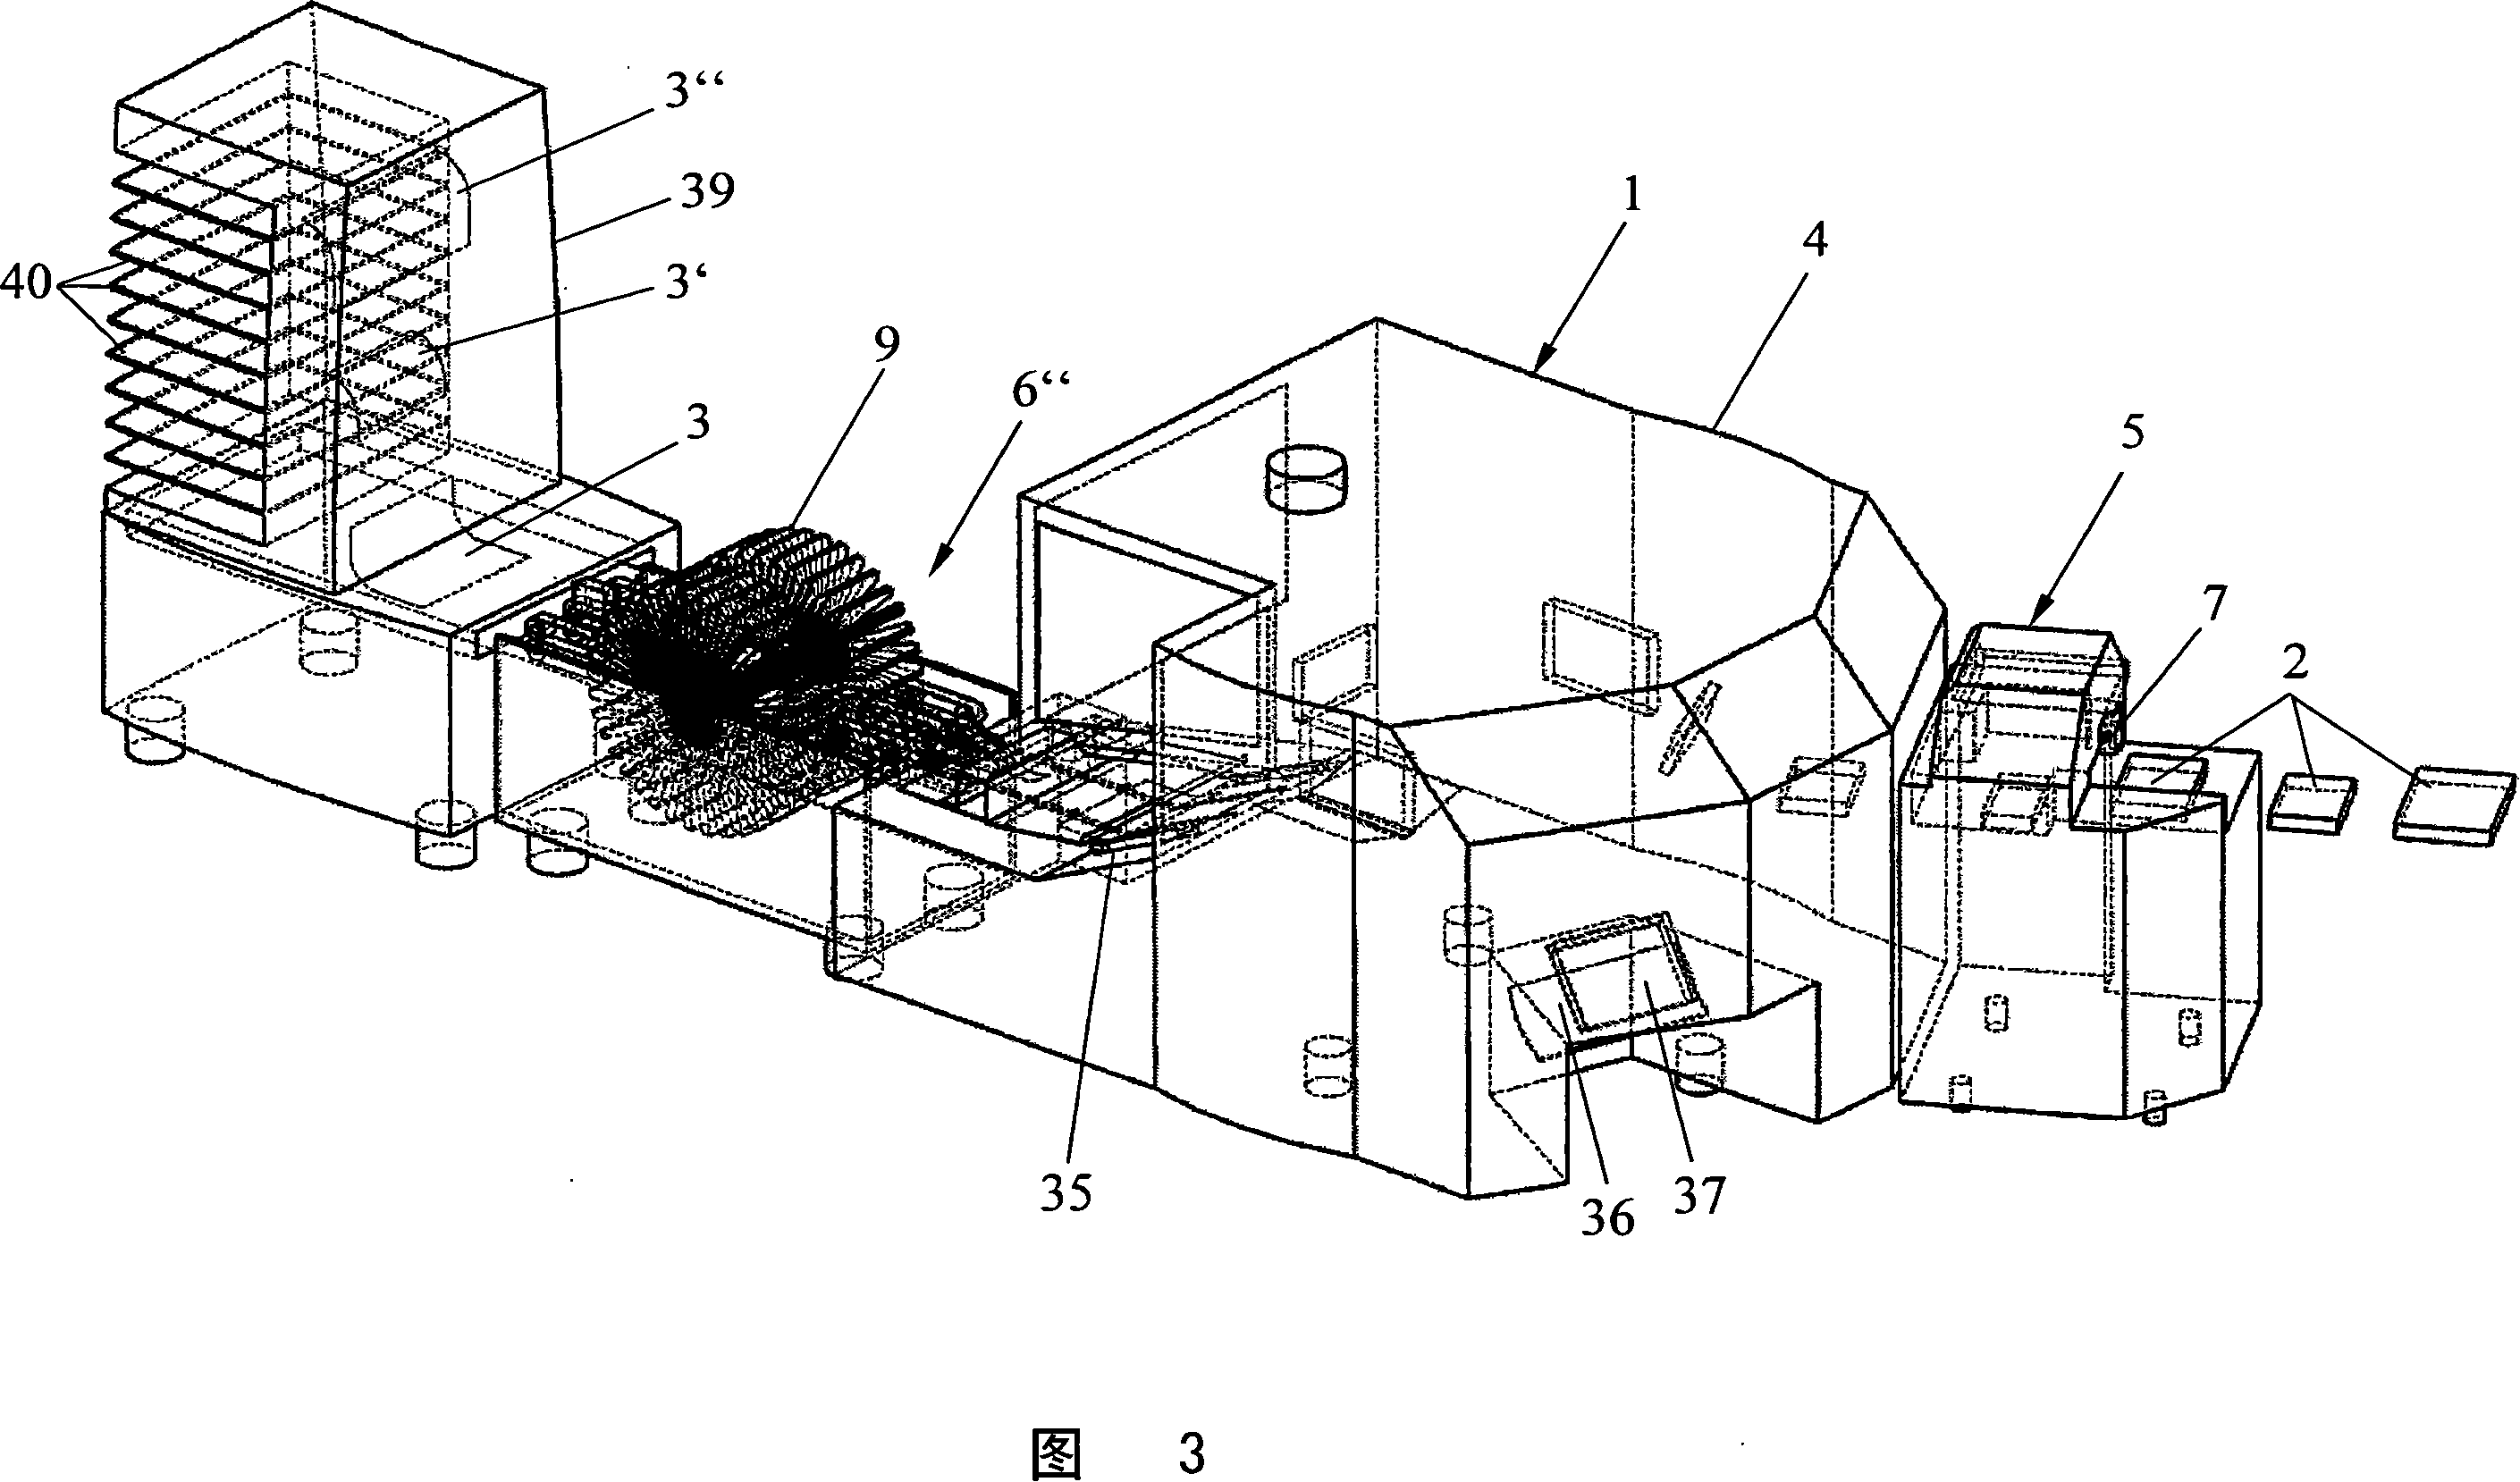 Process and device for manufacturing printed products composed of a block of sheets and a cover